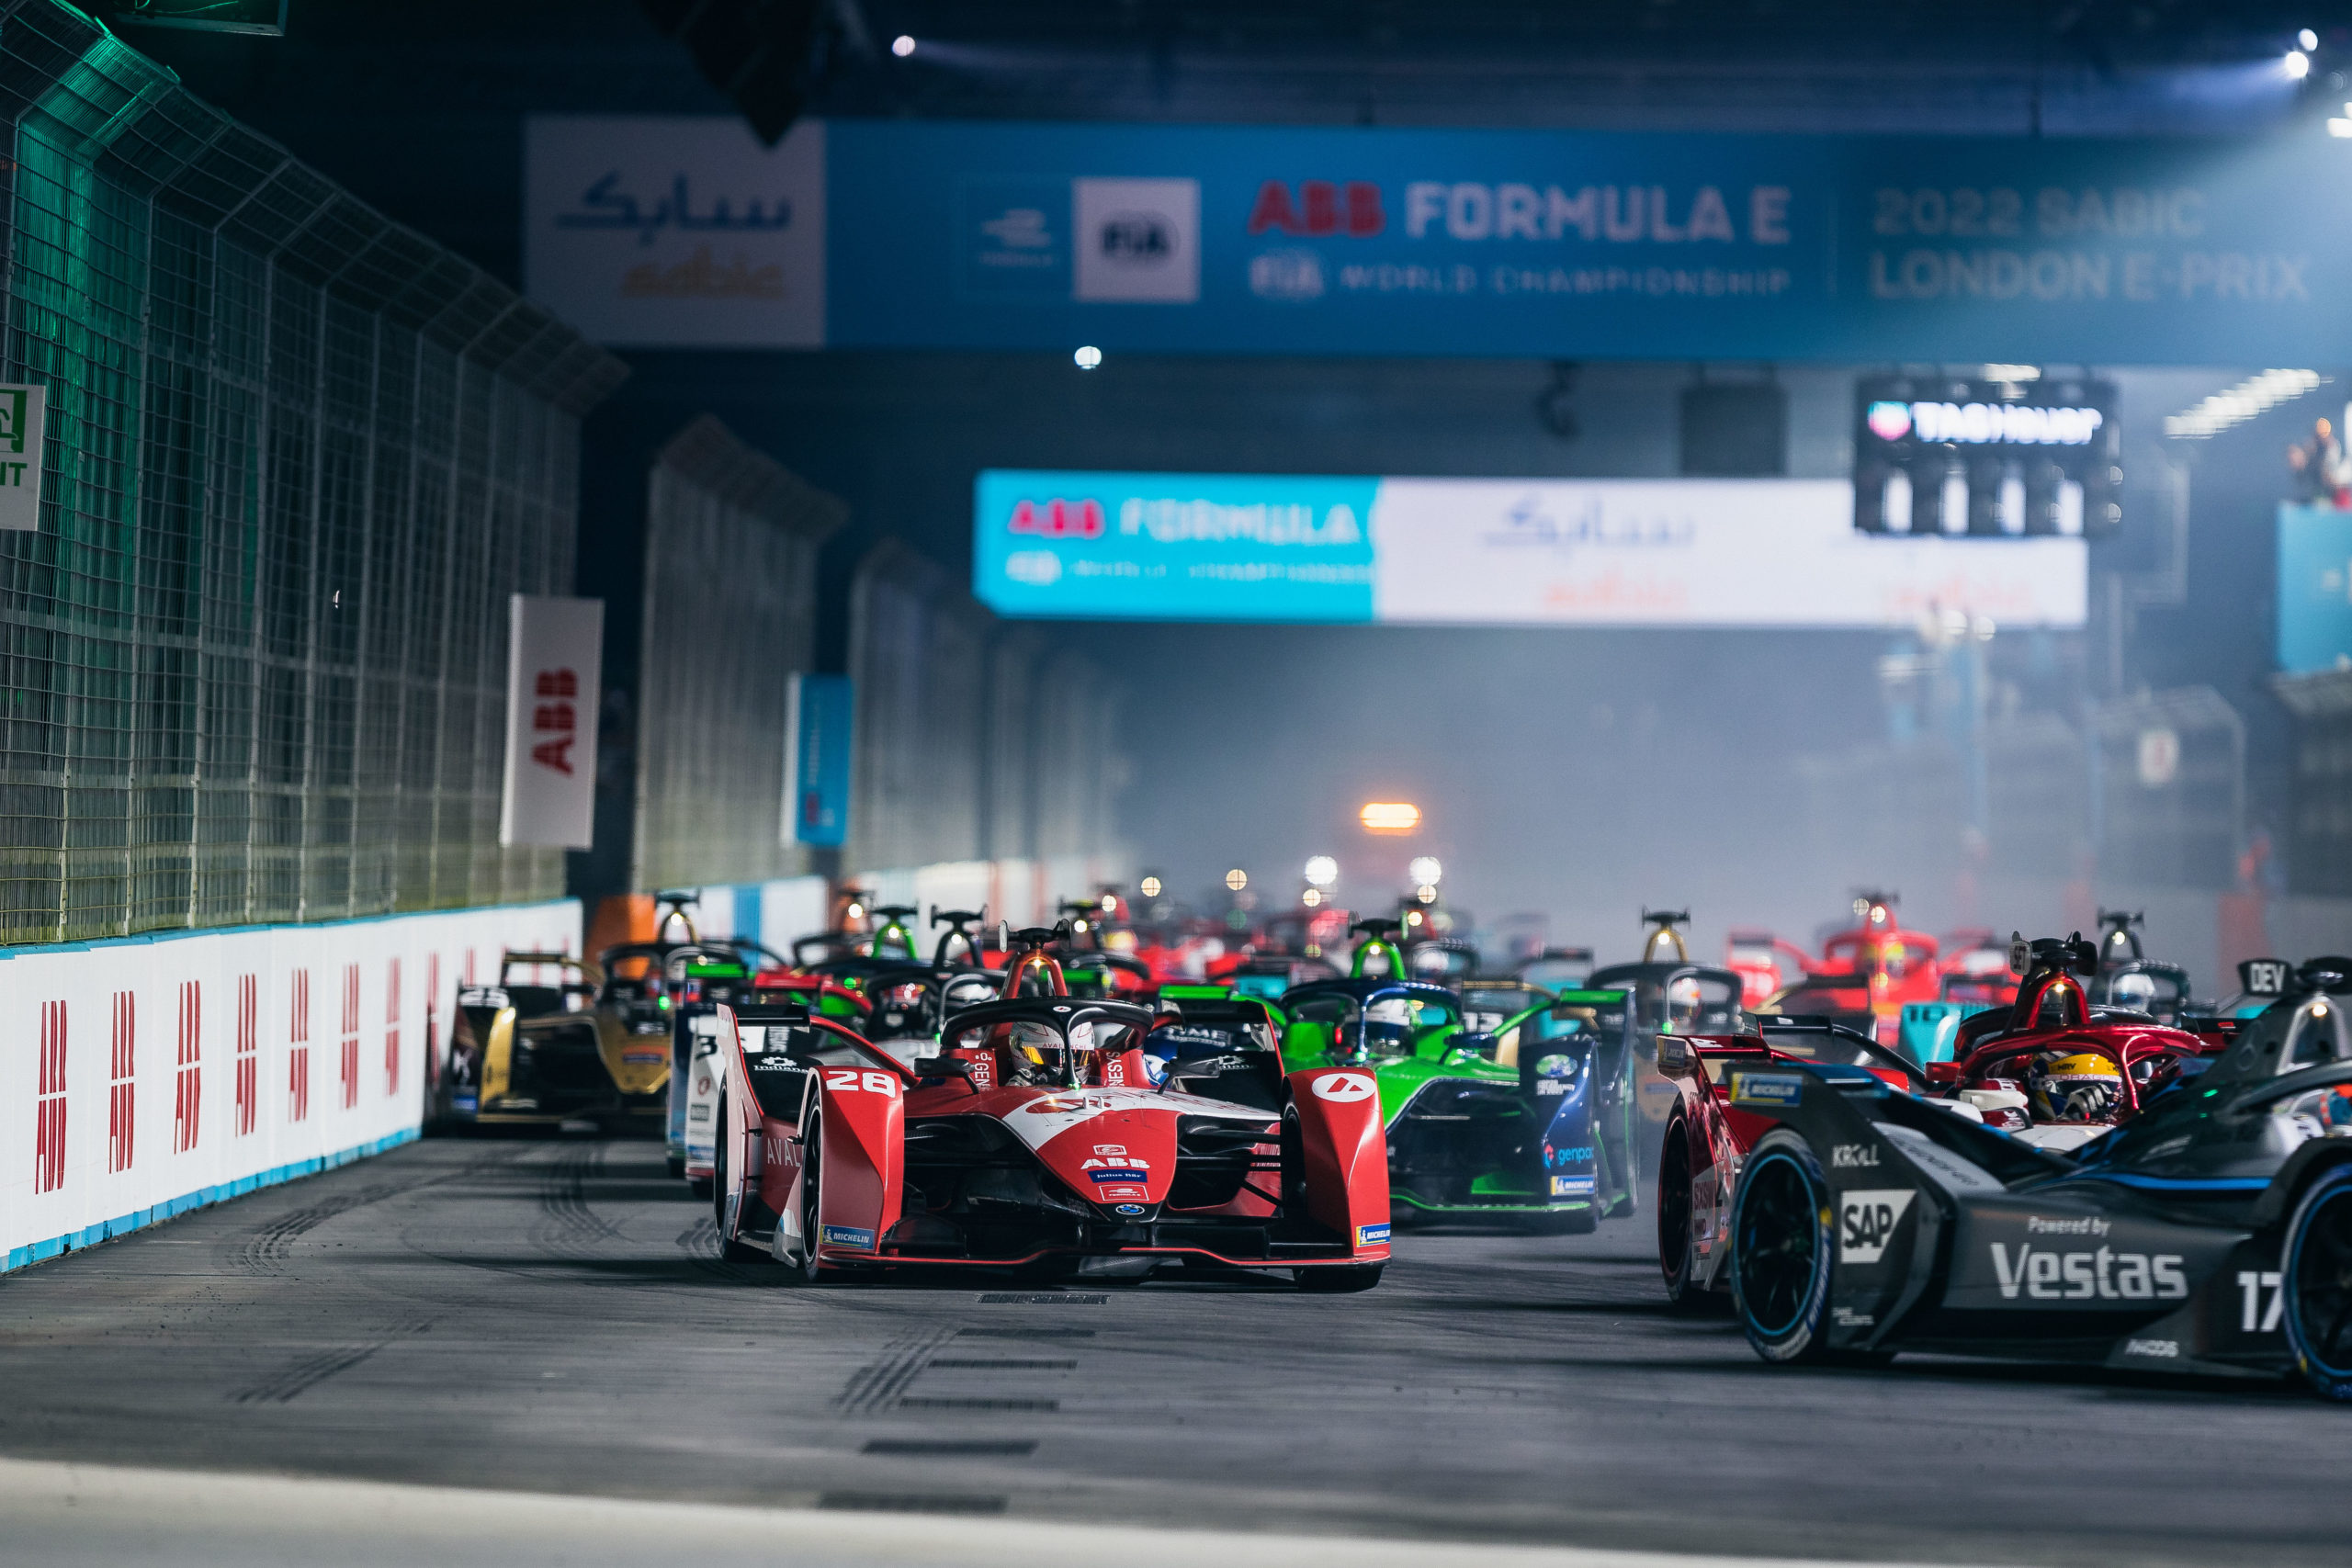 formula e’s ideal finale venue is a template for racing’s future